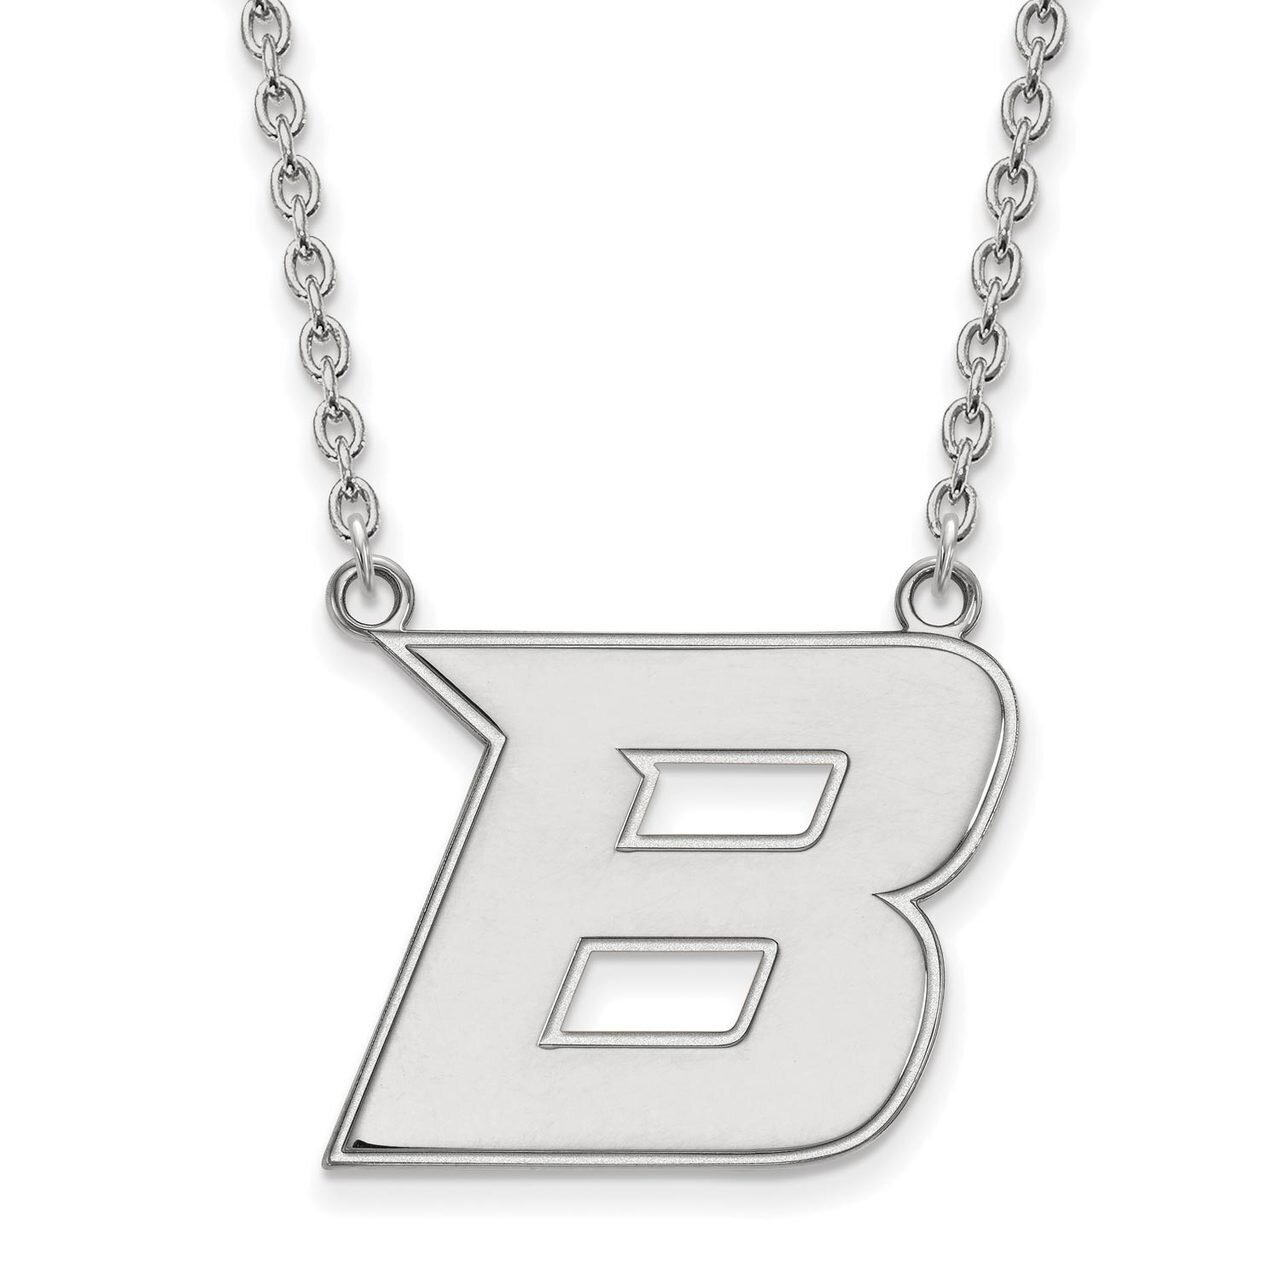 Boise State University Large Pendant with Chain Necklace 14k White Gold 4W008BOS-18